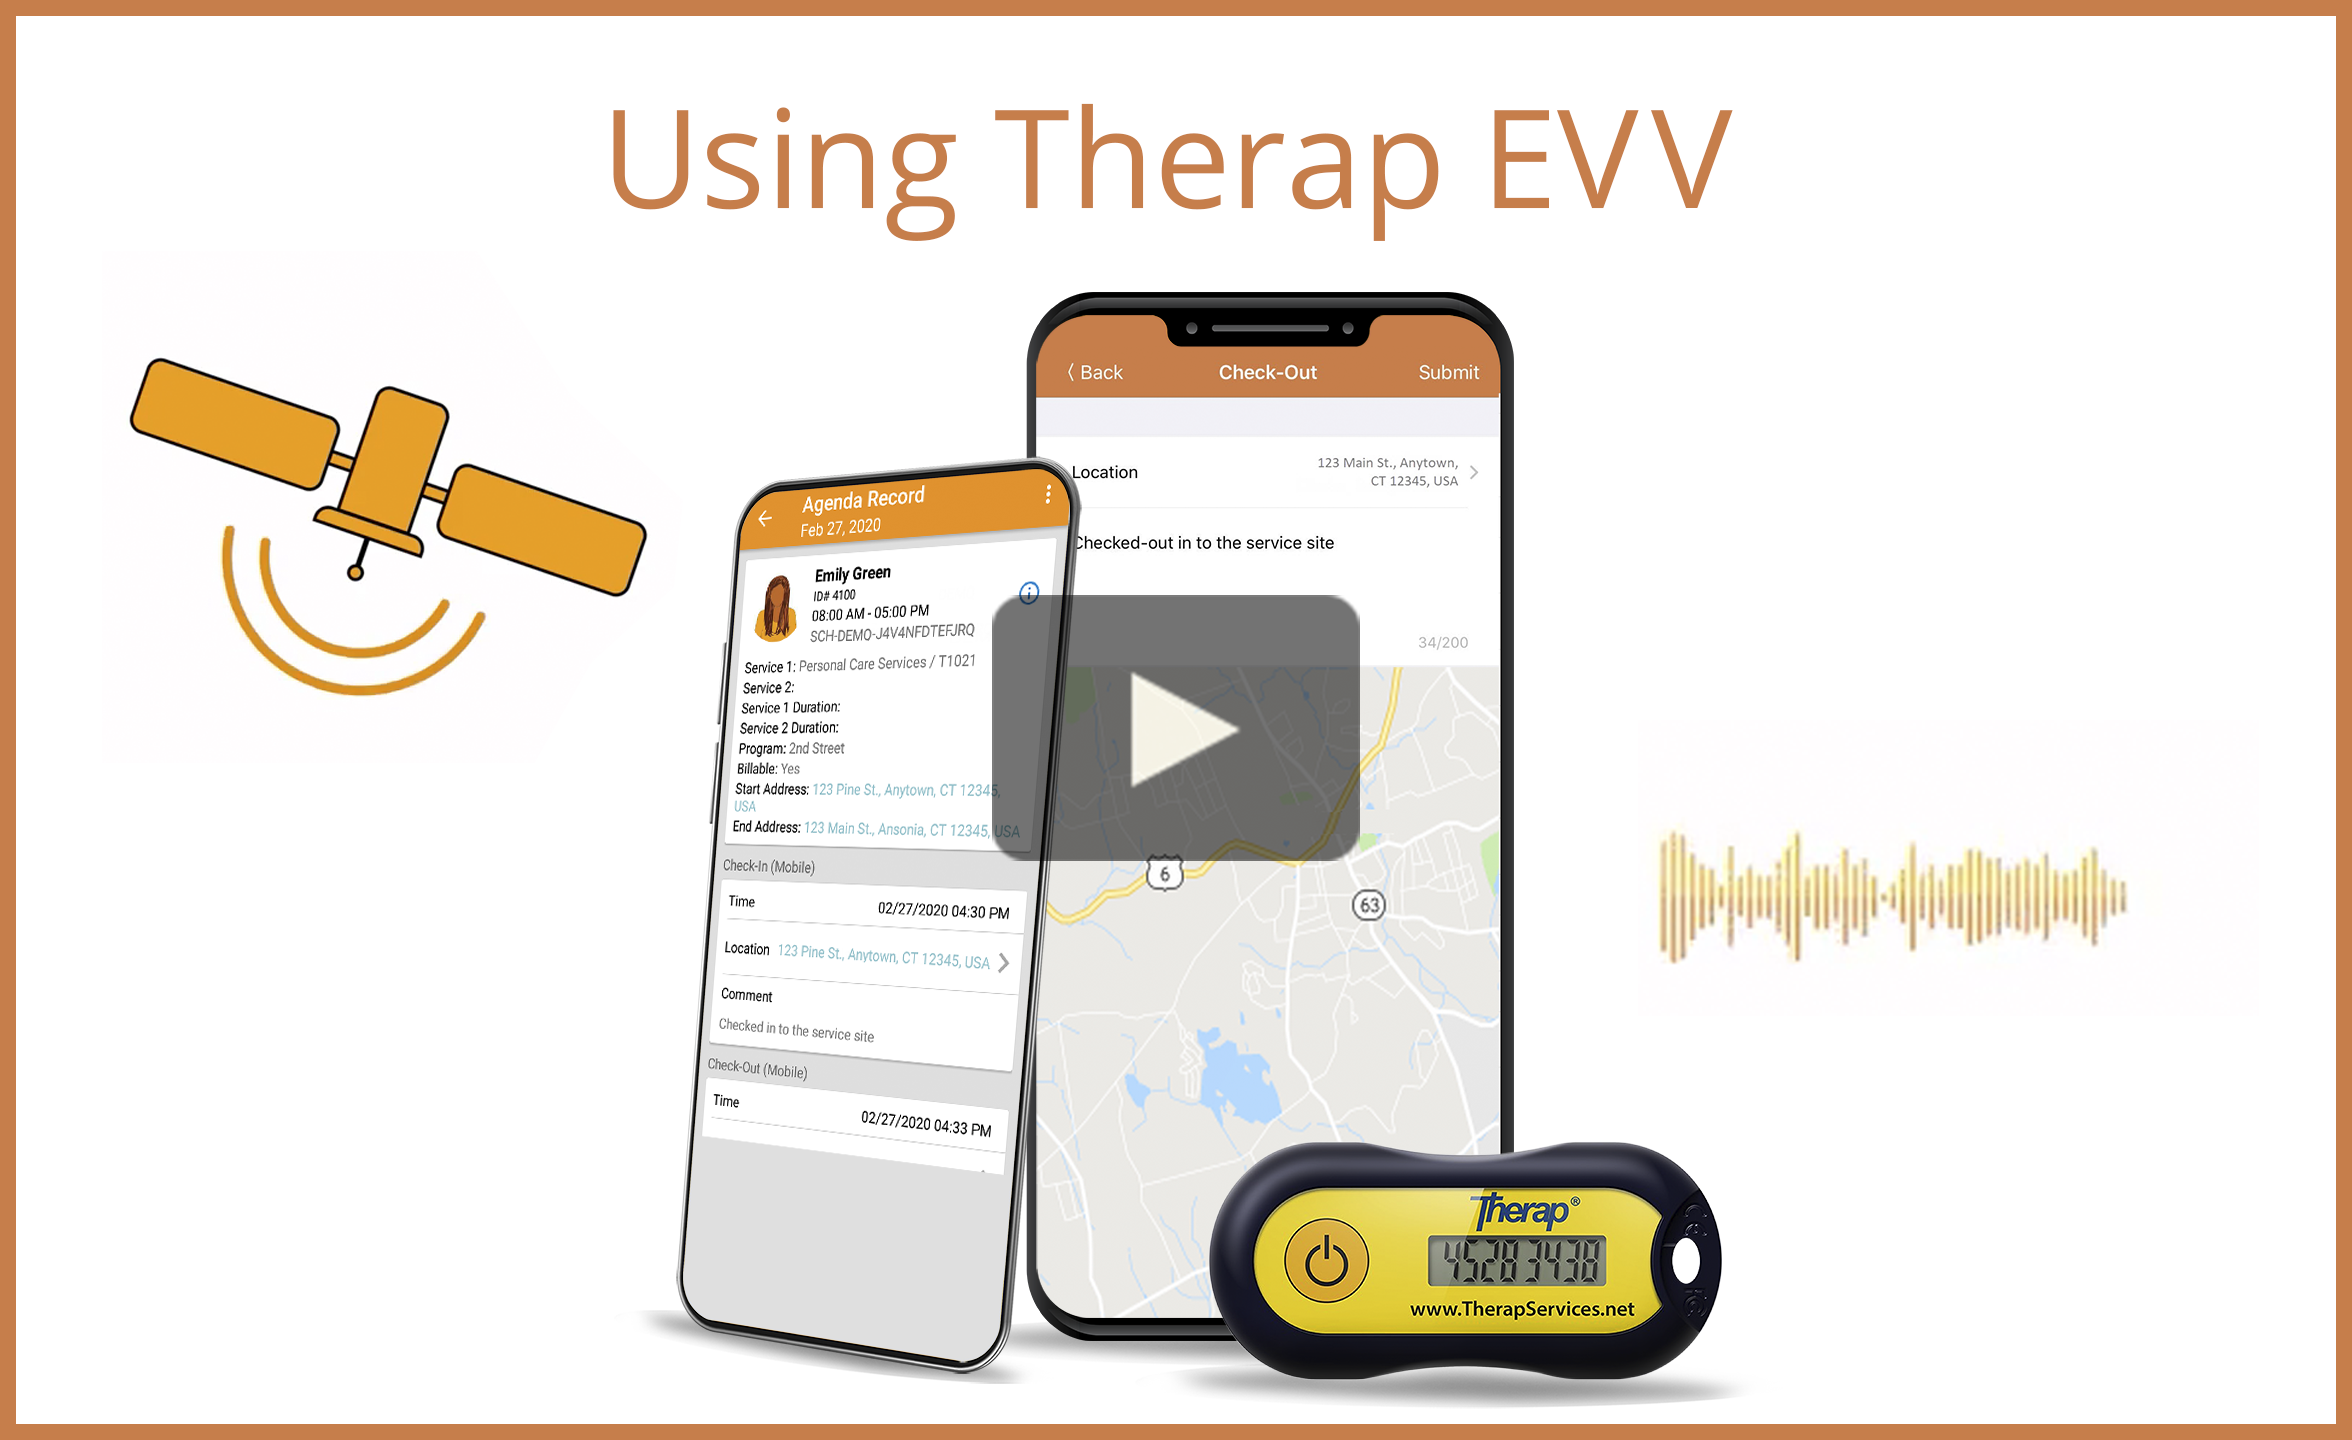 Watch video on using Therap EVV